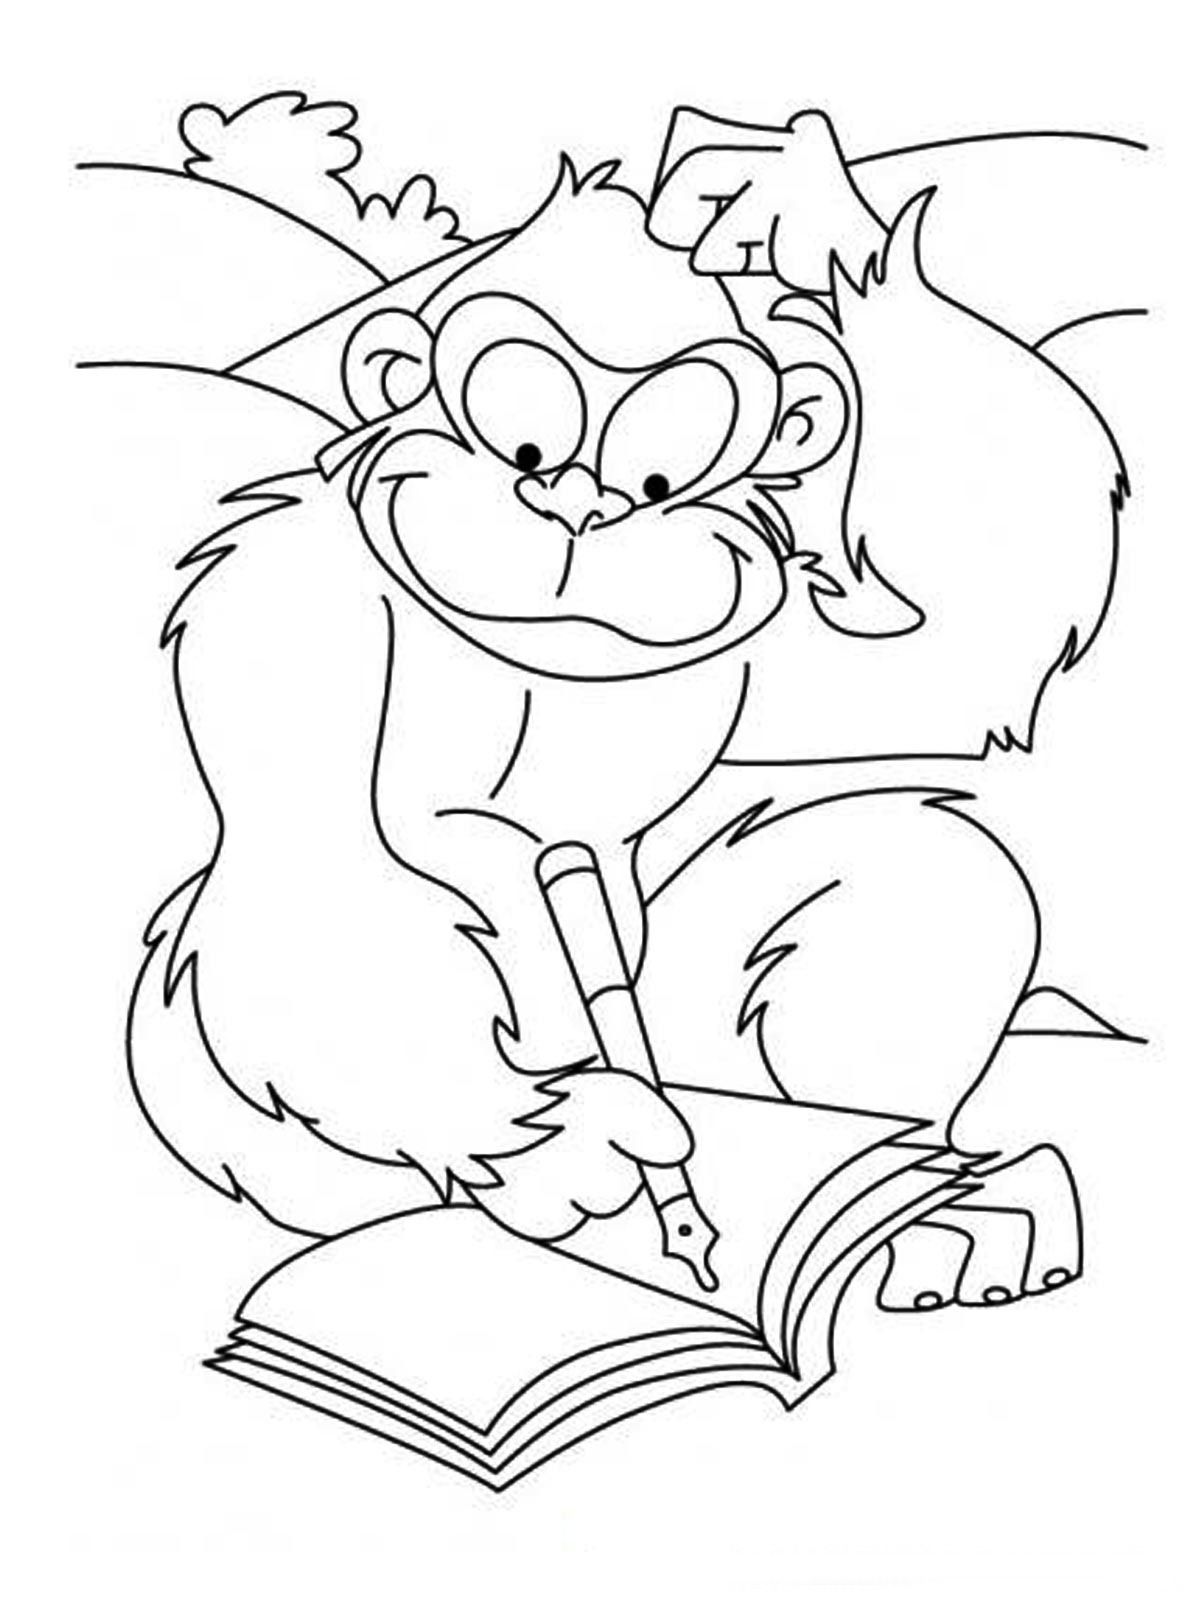 Free Funny Animal Coloring Page, Download Free Funny Animal Coloring